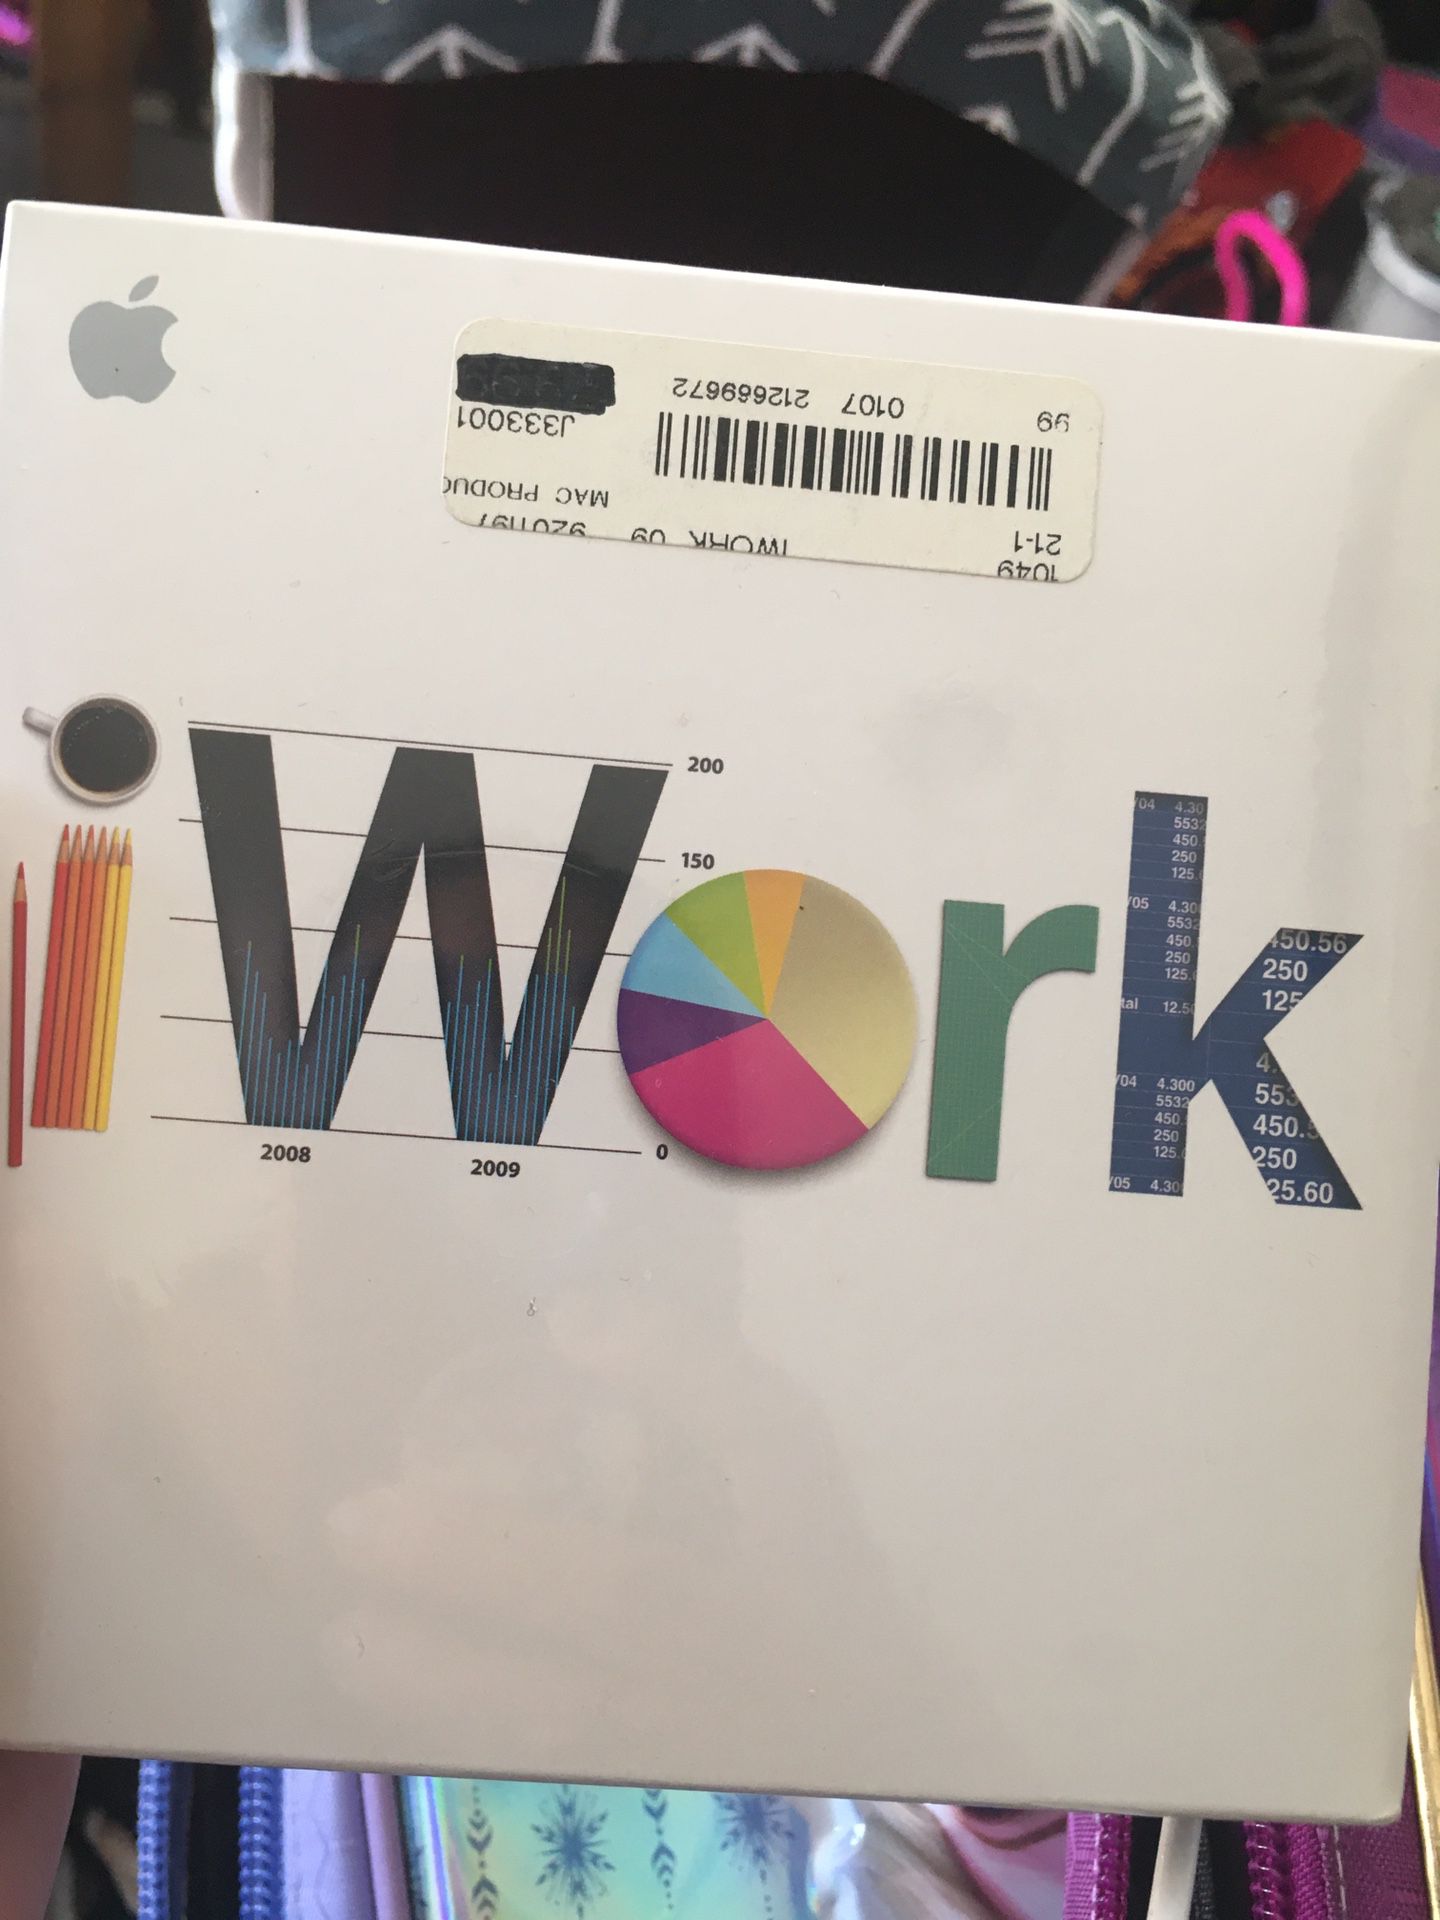 iWork software brand new! Never opened